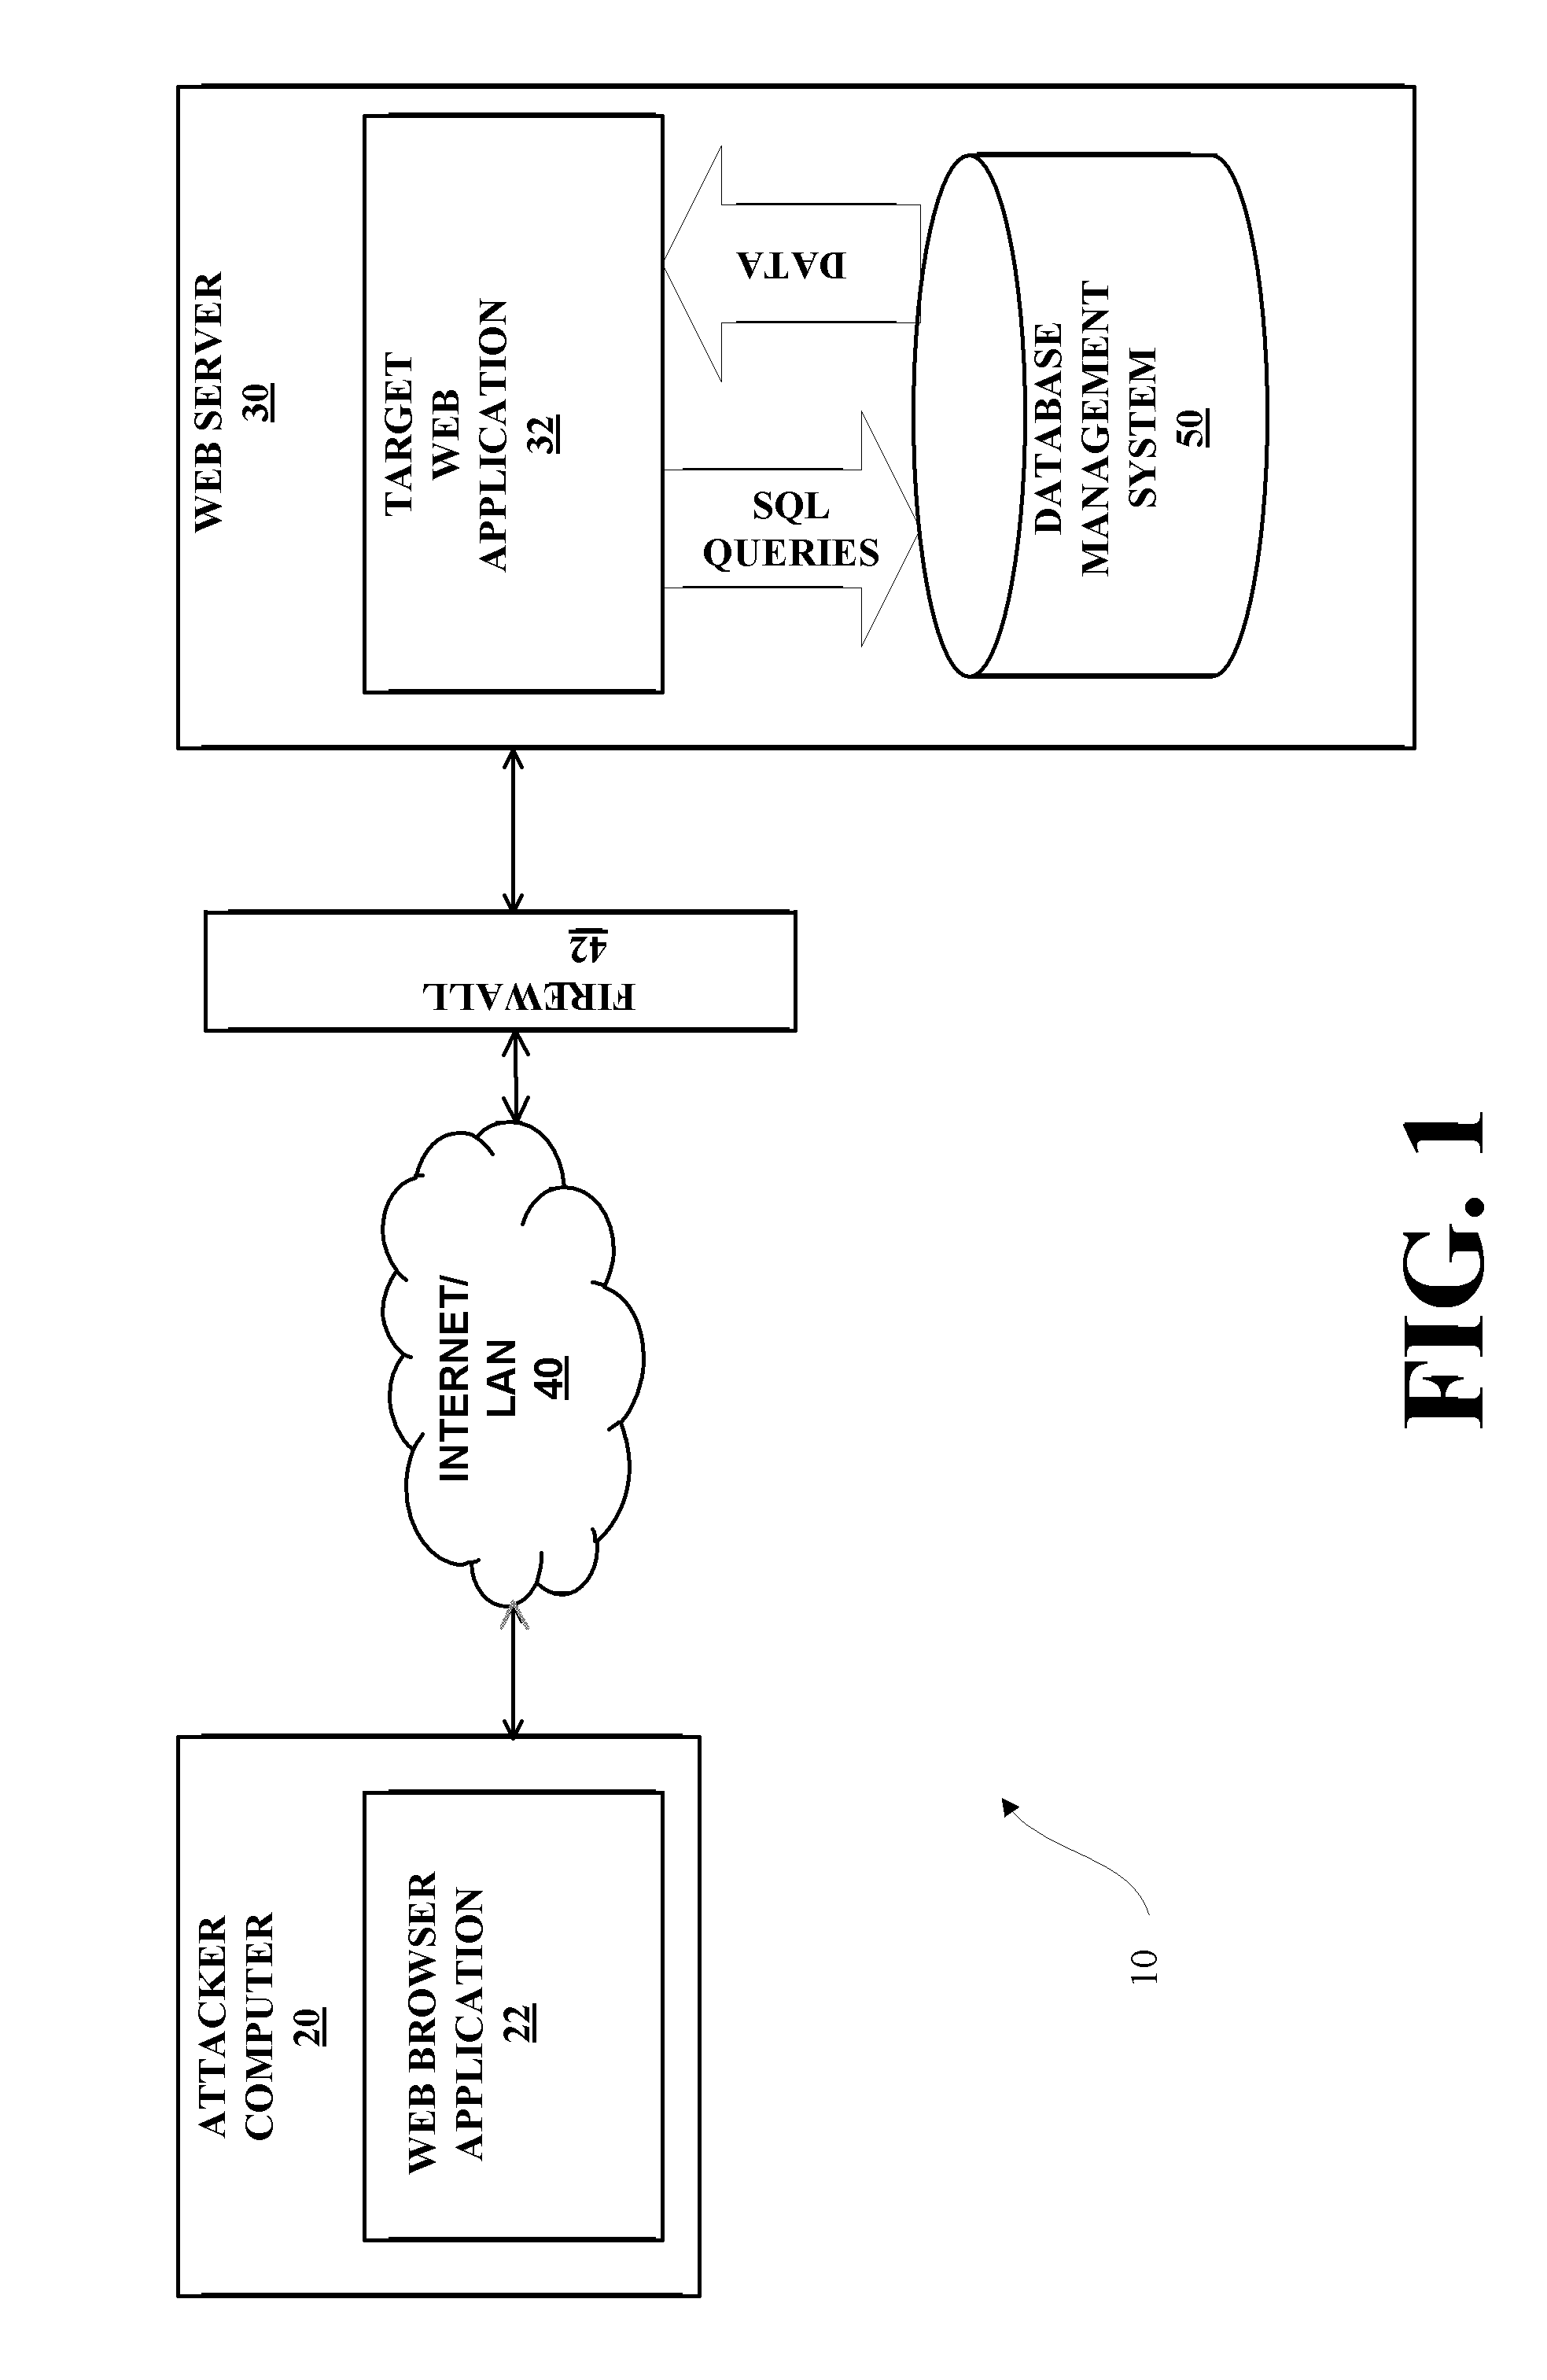 System and Method for Providing Application Penetration Testing